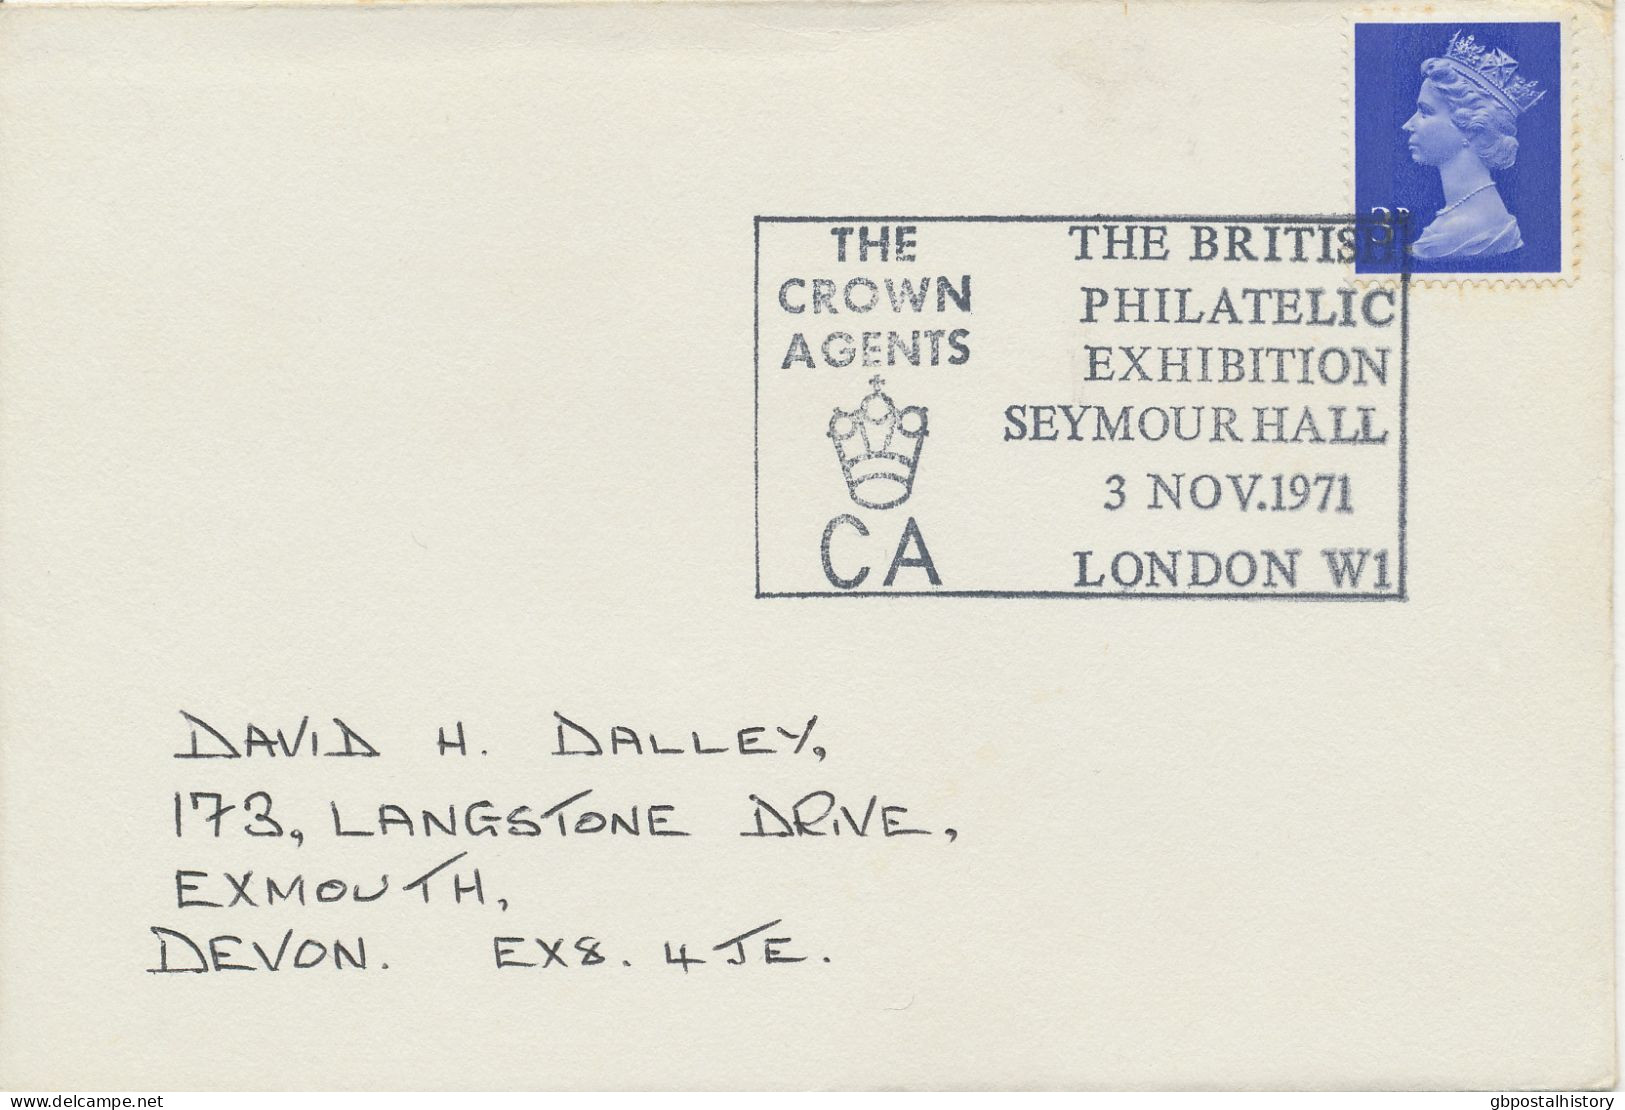 GB SPECIAL EVENT POSTMARKS 1971 THE BRITISH PHILATELIC EXHIBITION SEYMOUR HALL LONDON W.I. - THE CROWN AGENTS - Briefe U. Dokumente